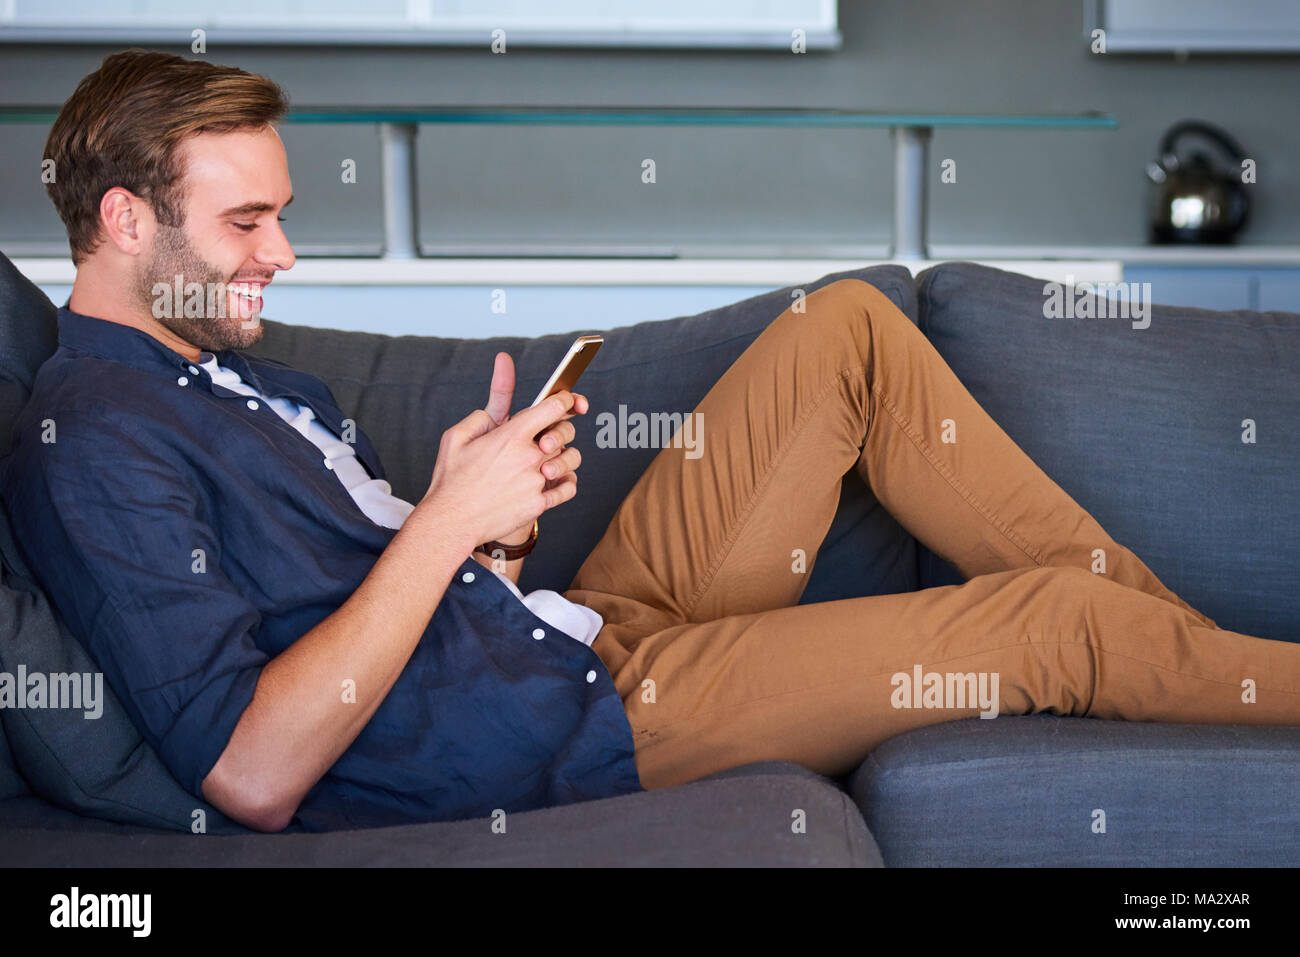 Profile image of handsome man busy smiling while texting on his mobile phone, comfortably seated on his modern couch in his living room with the sleek Stock Photo